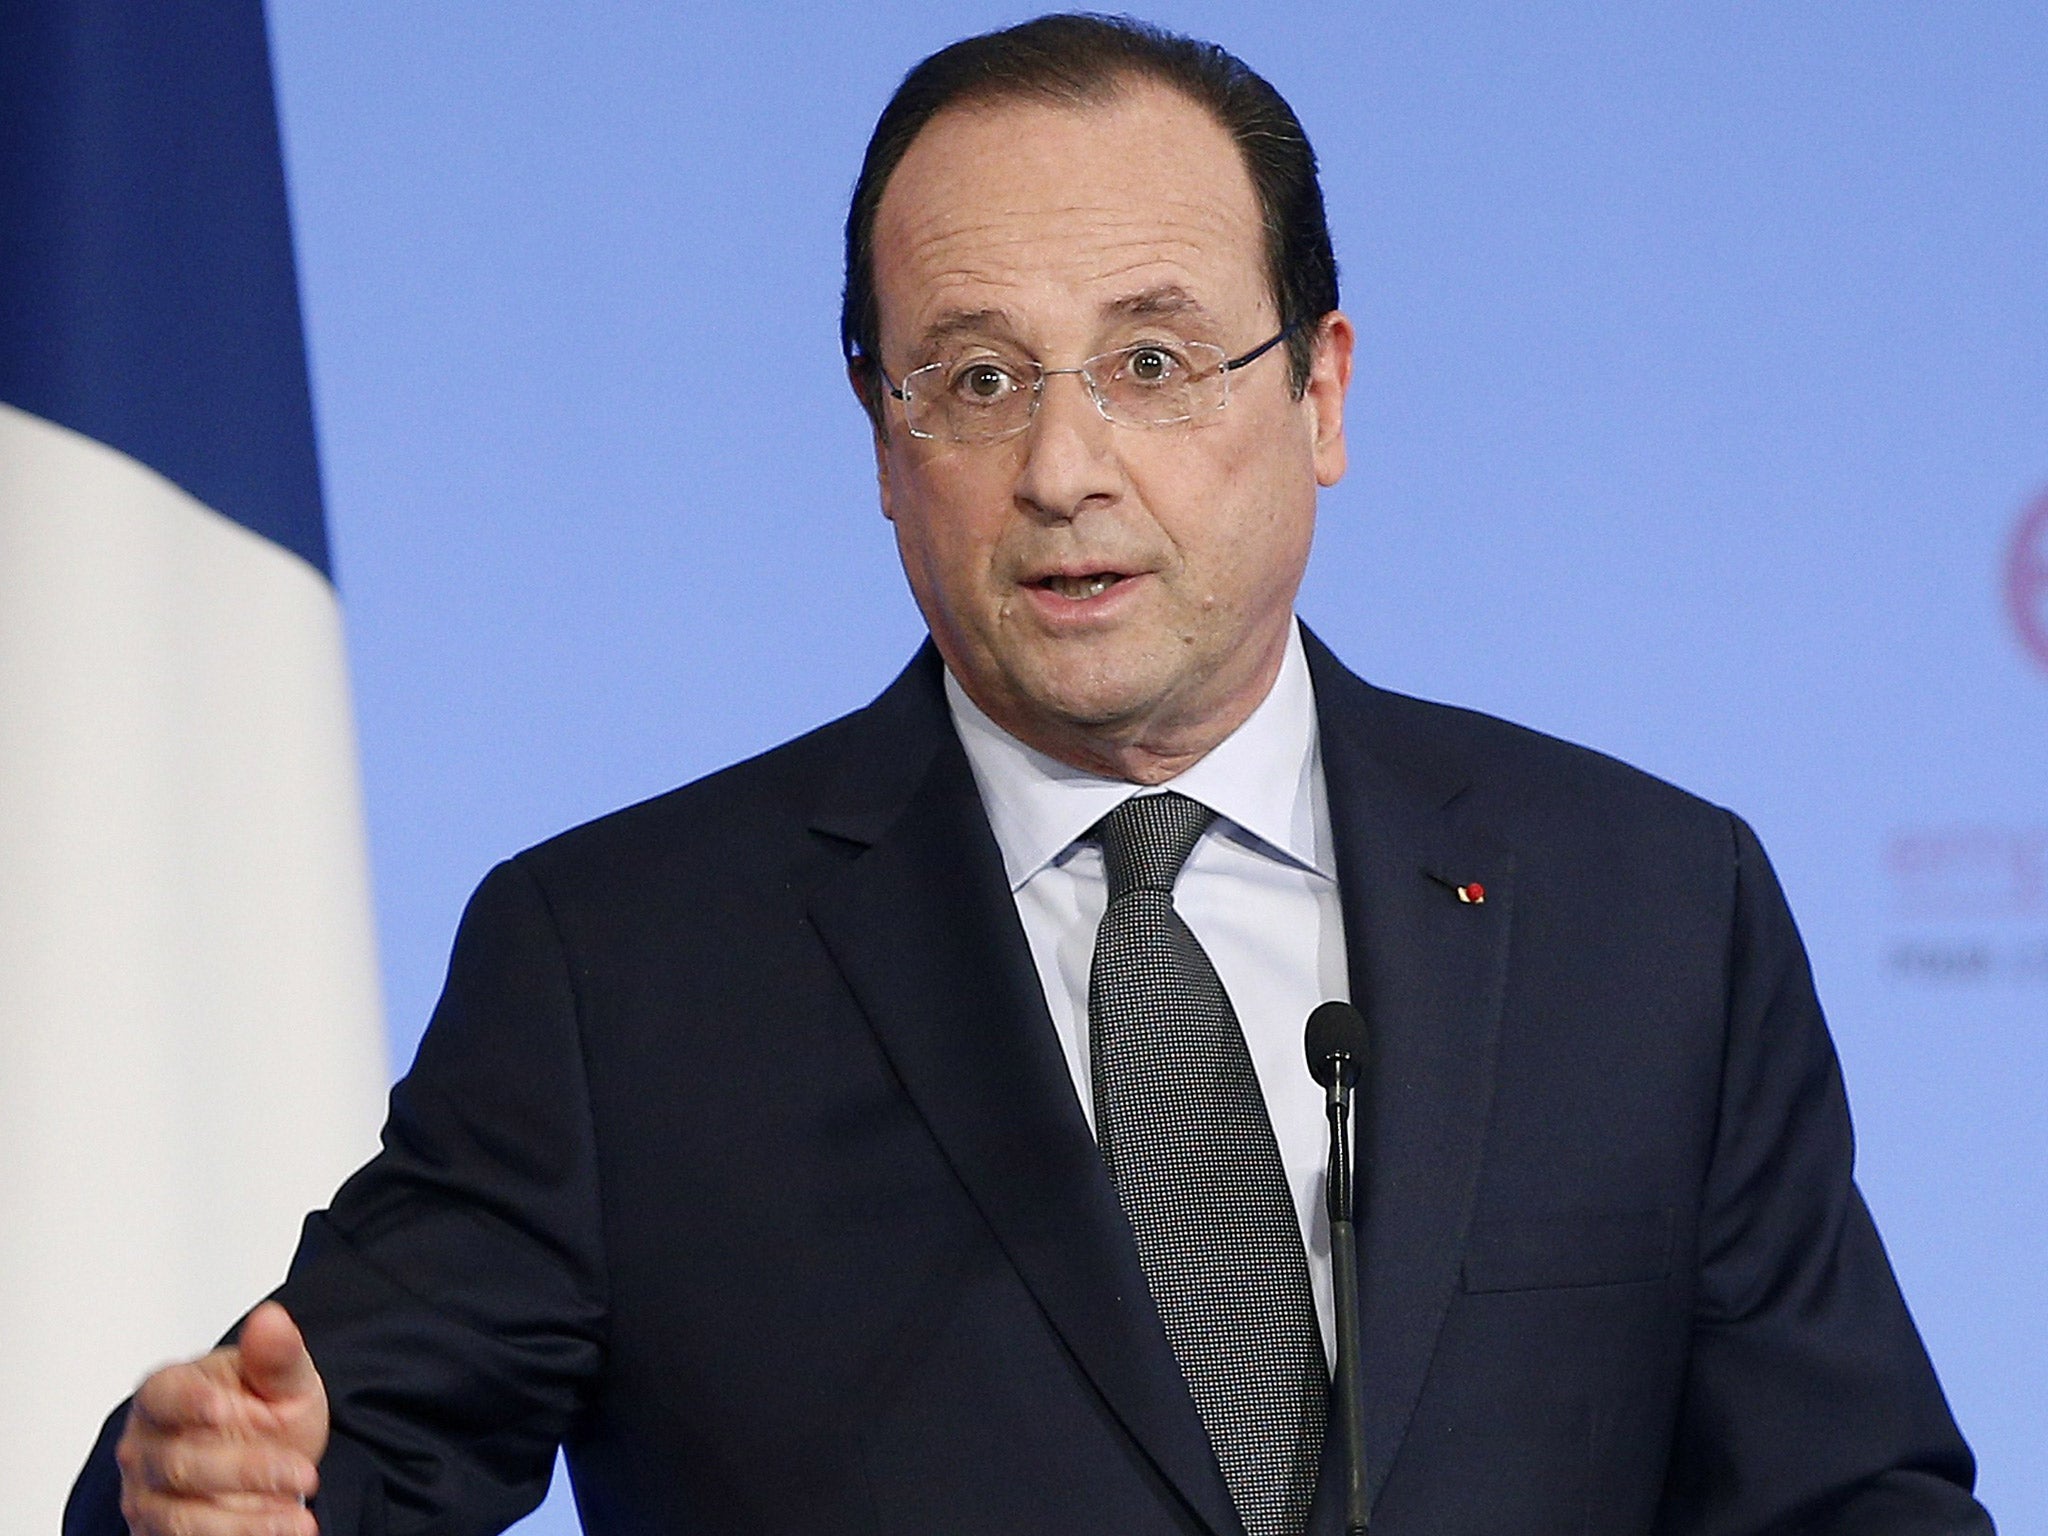 François Hollande delivering a speech at the Elysee Palace in Paris on Tuesday